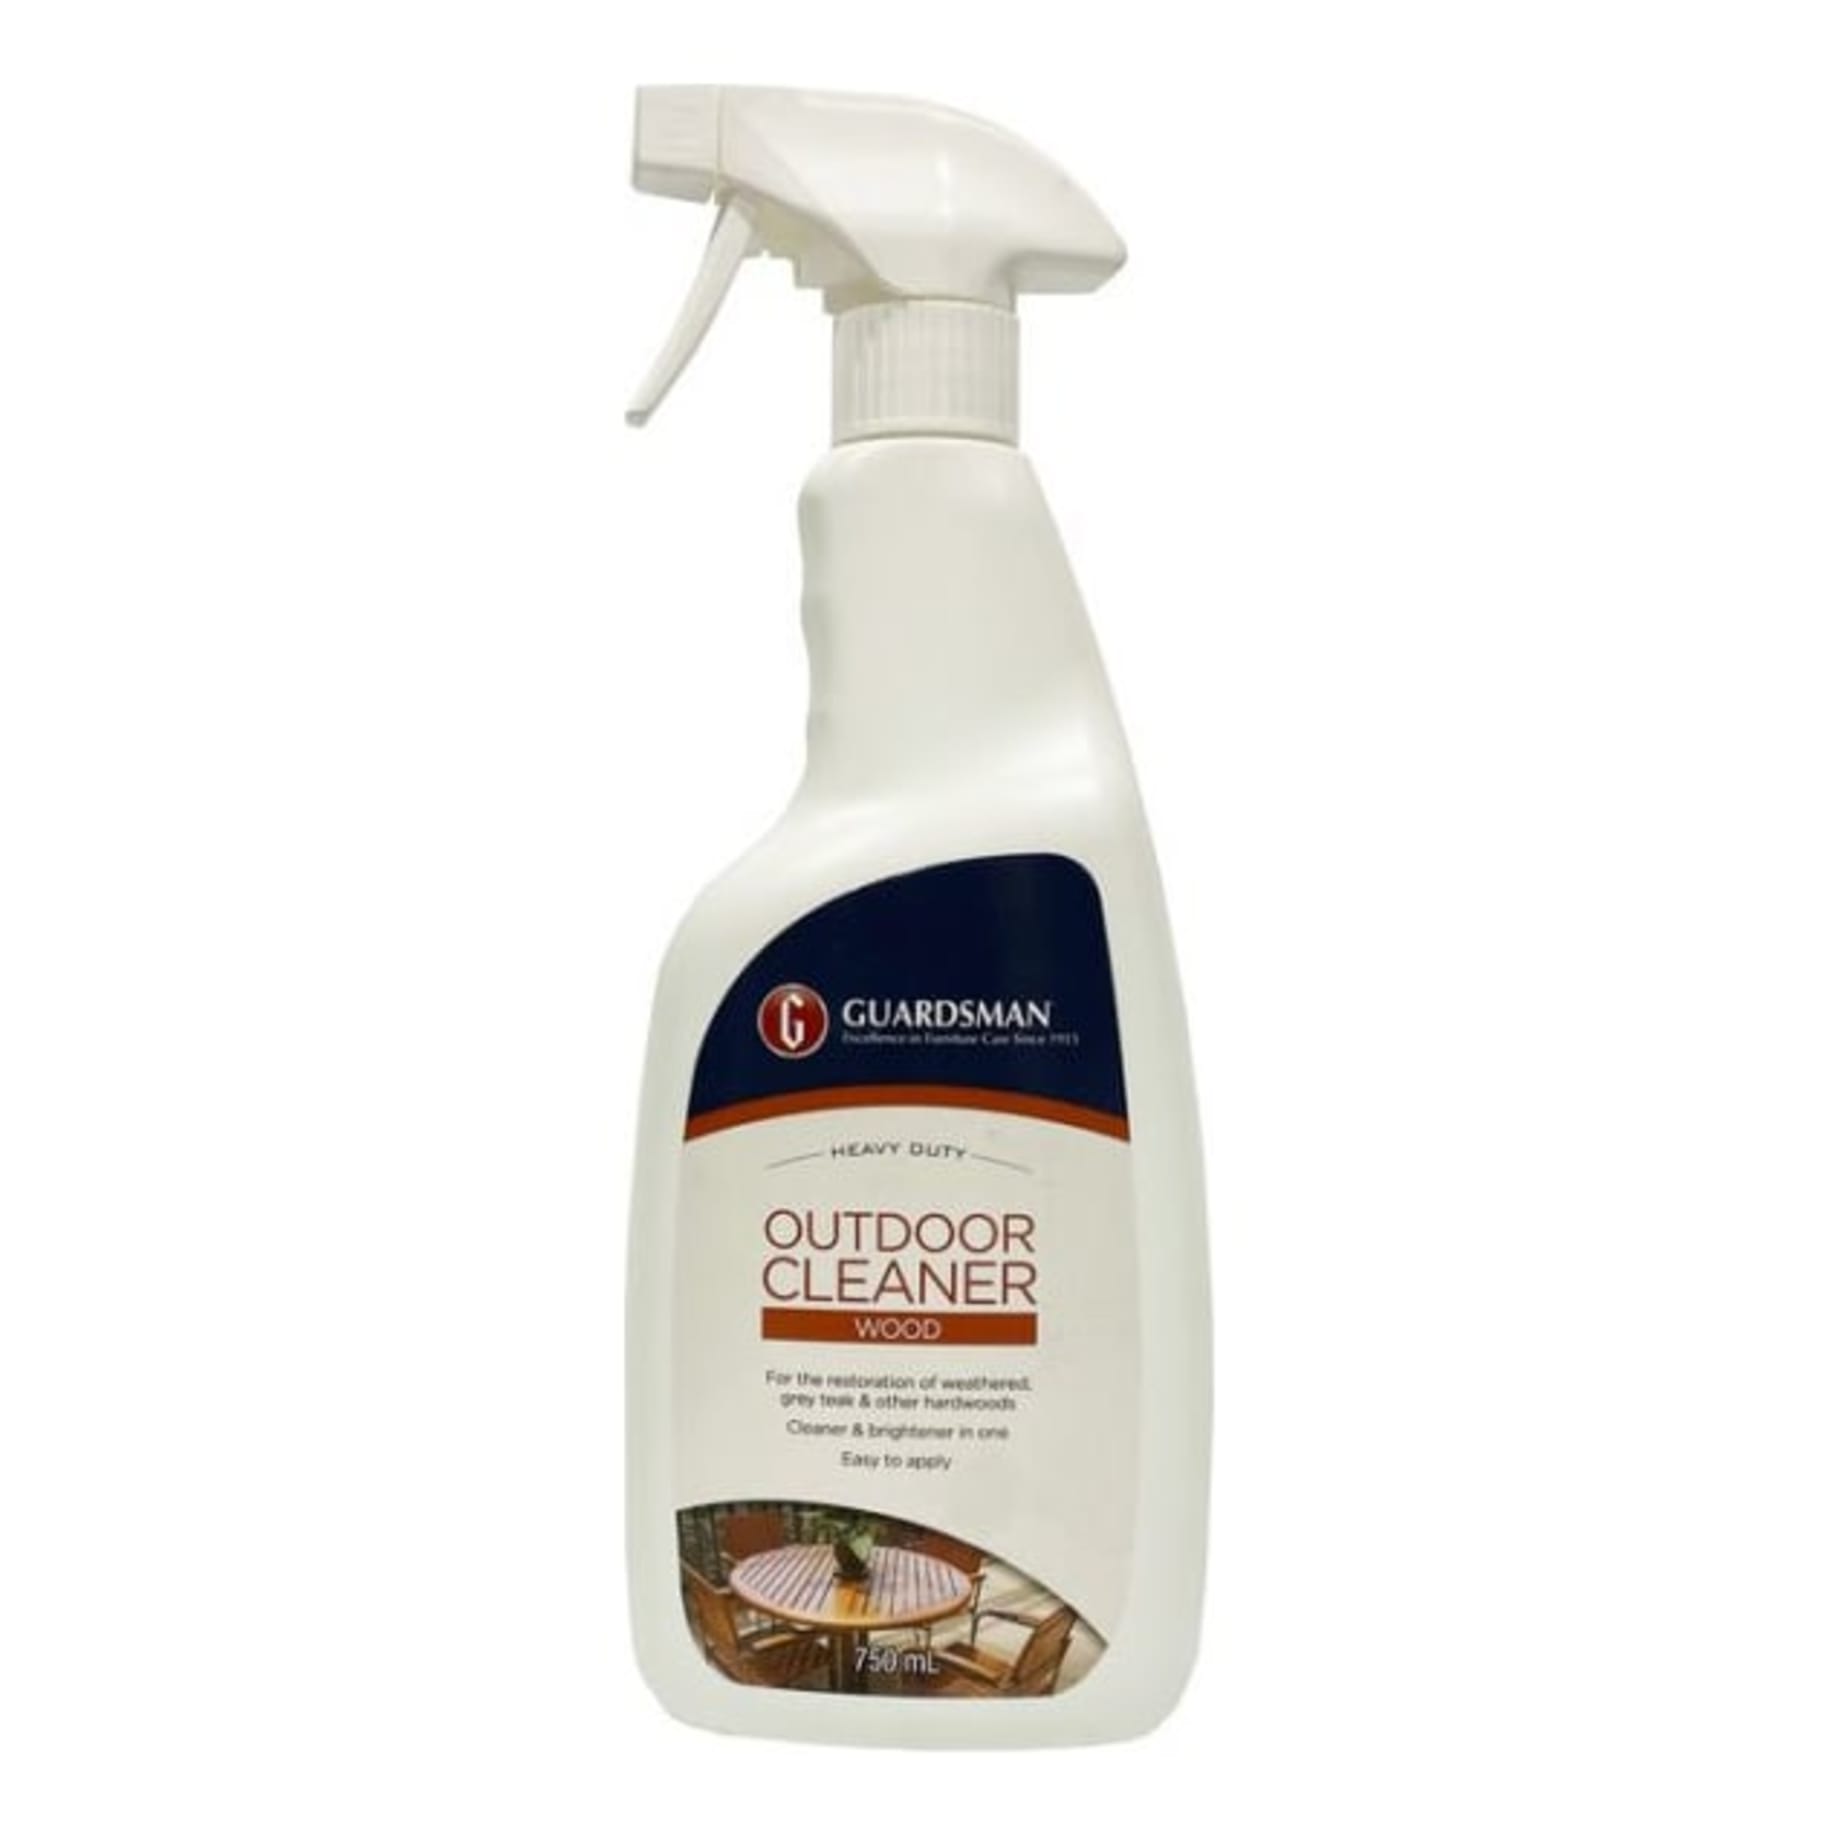 Guardsman Outdoor Cleaner Timber